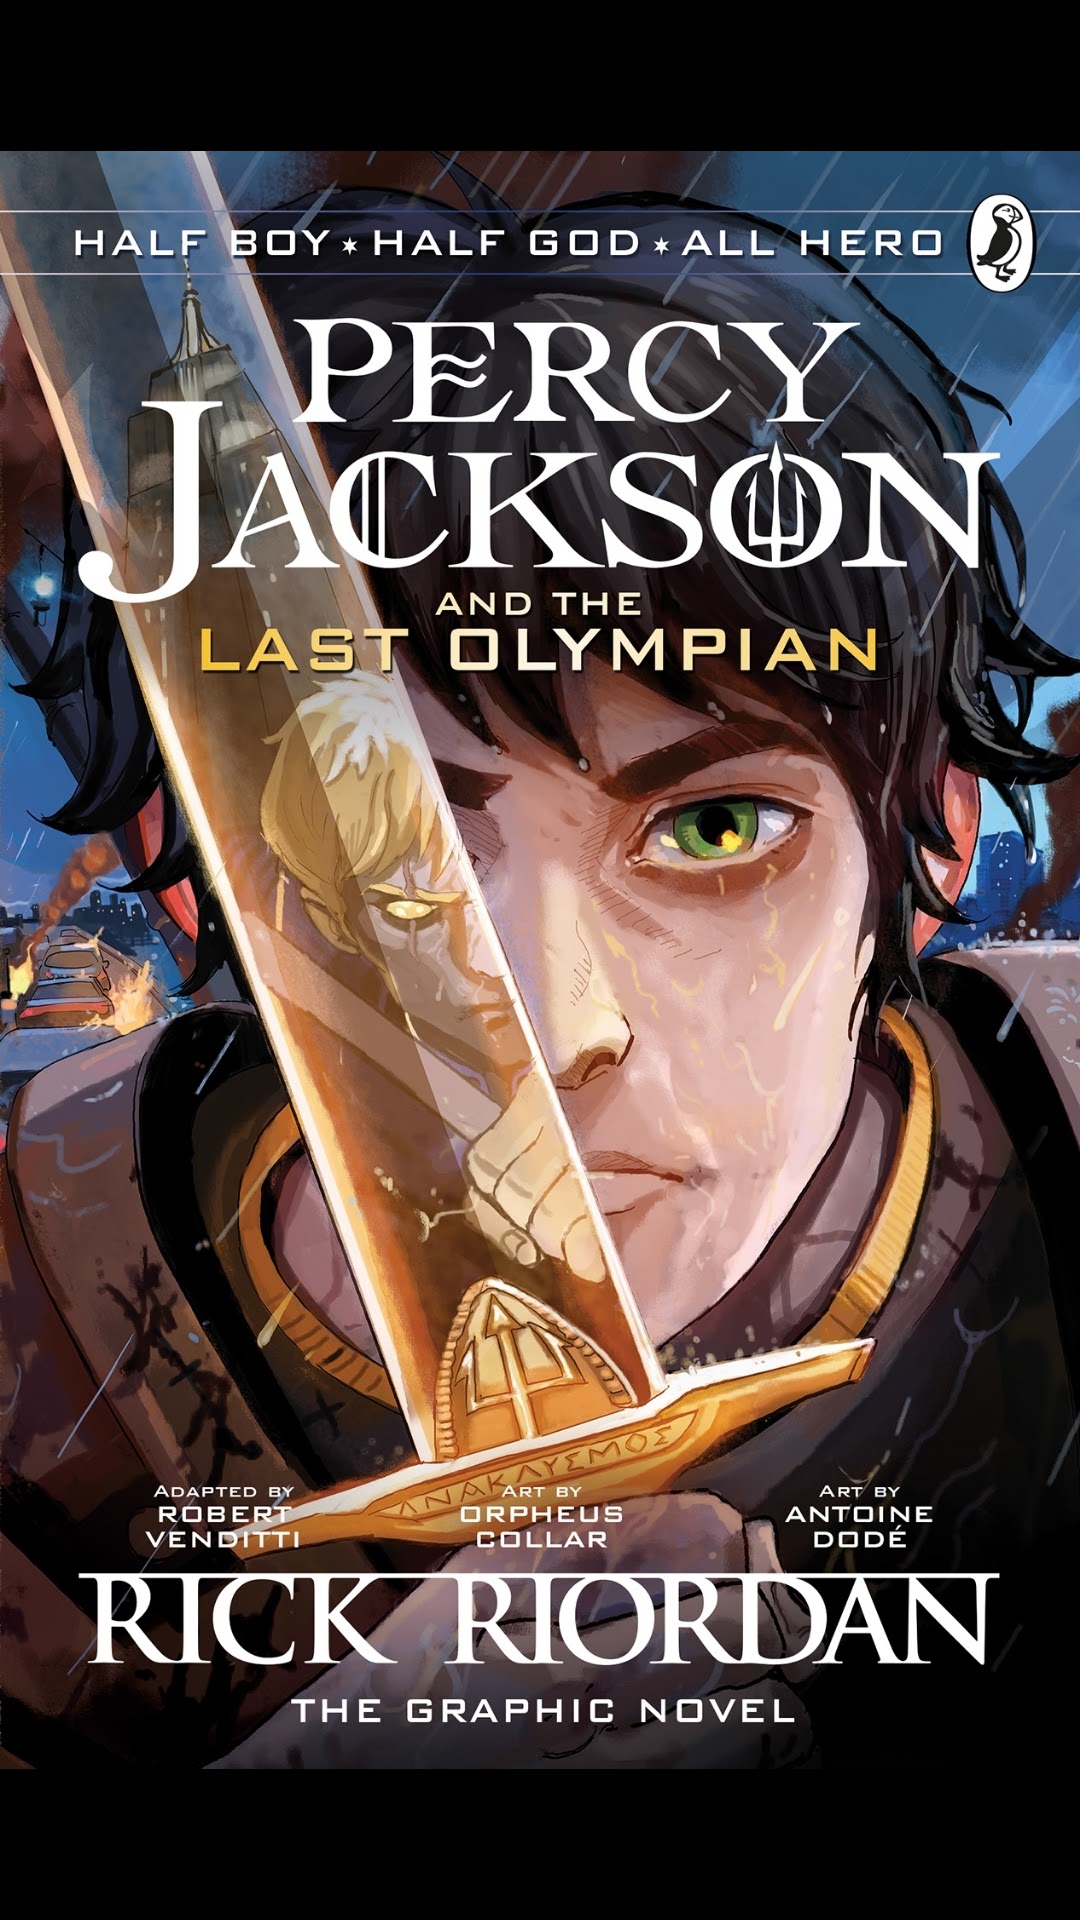 Read online Percy Jackson and the Olympians comic -  Issue # TPB 5 - 1